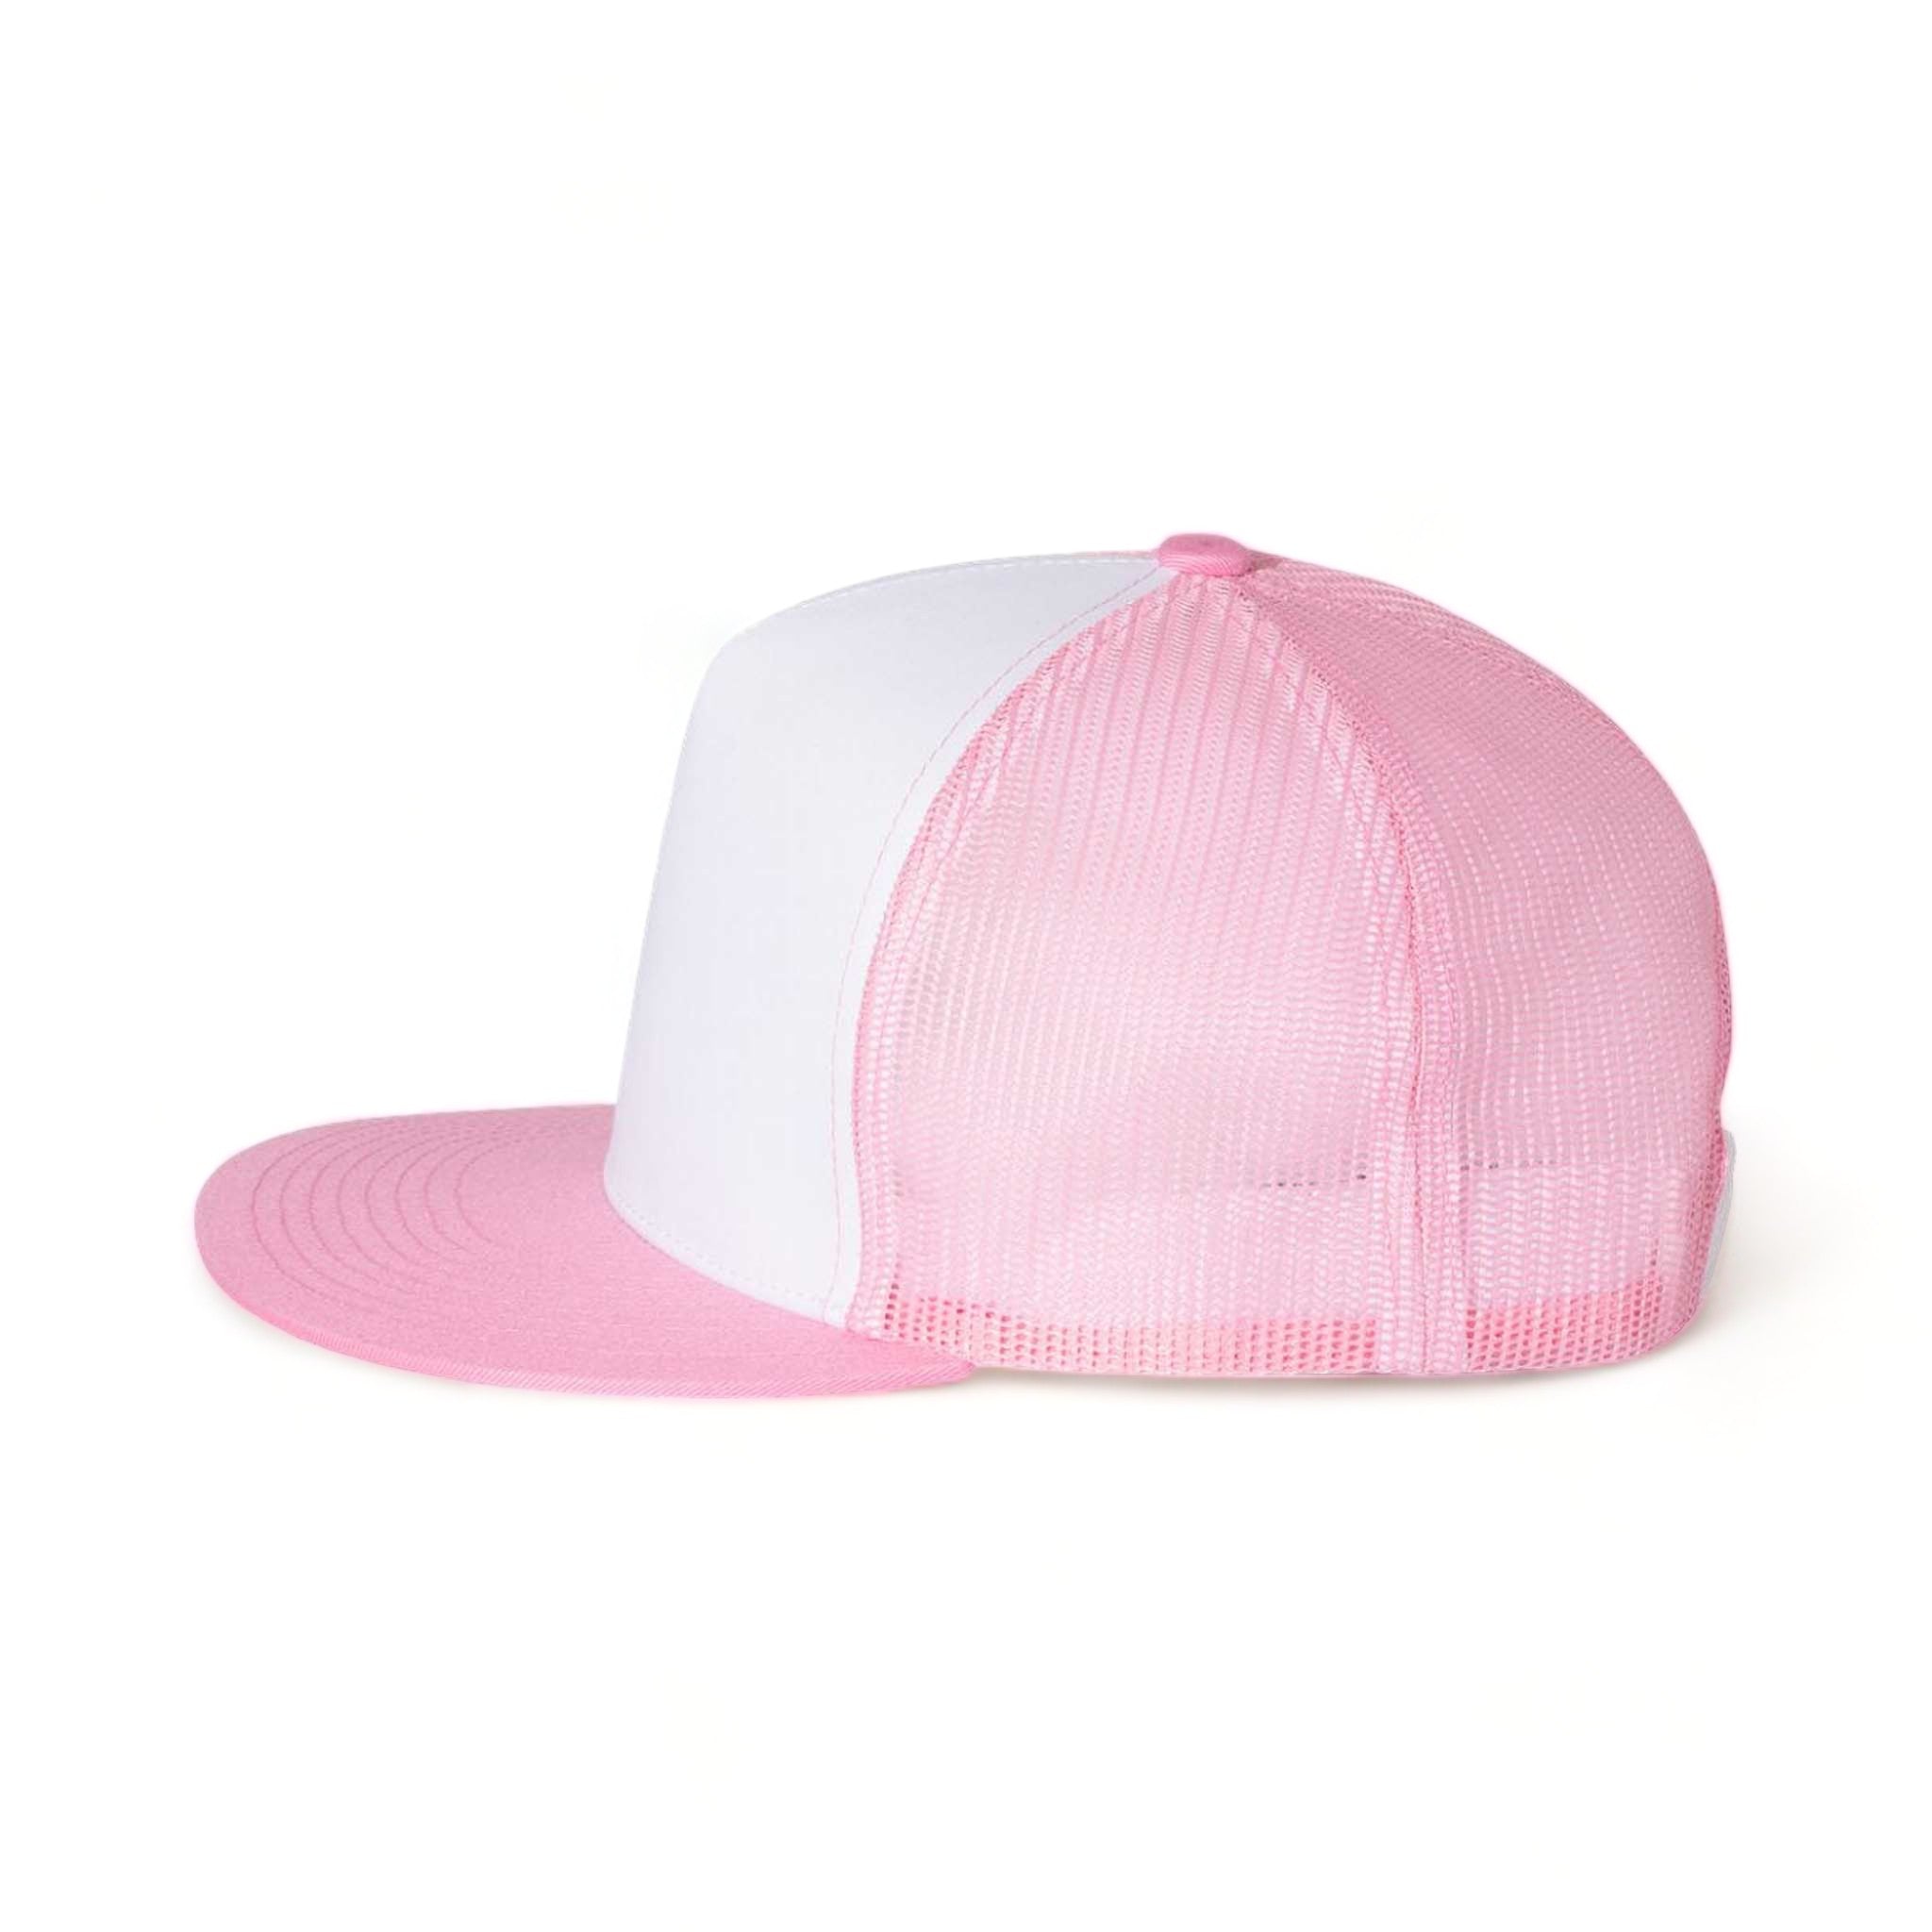 Side view of YP Classics 6006 custom hat in pink, white and pink